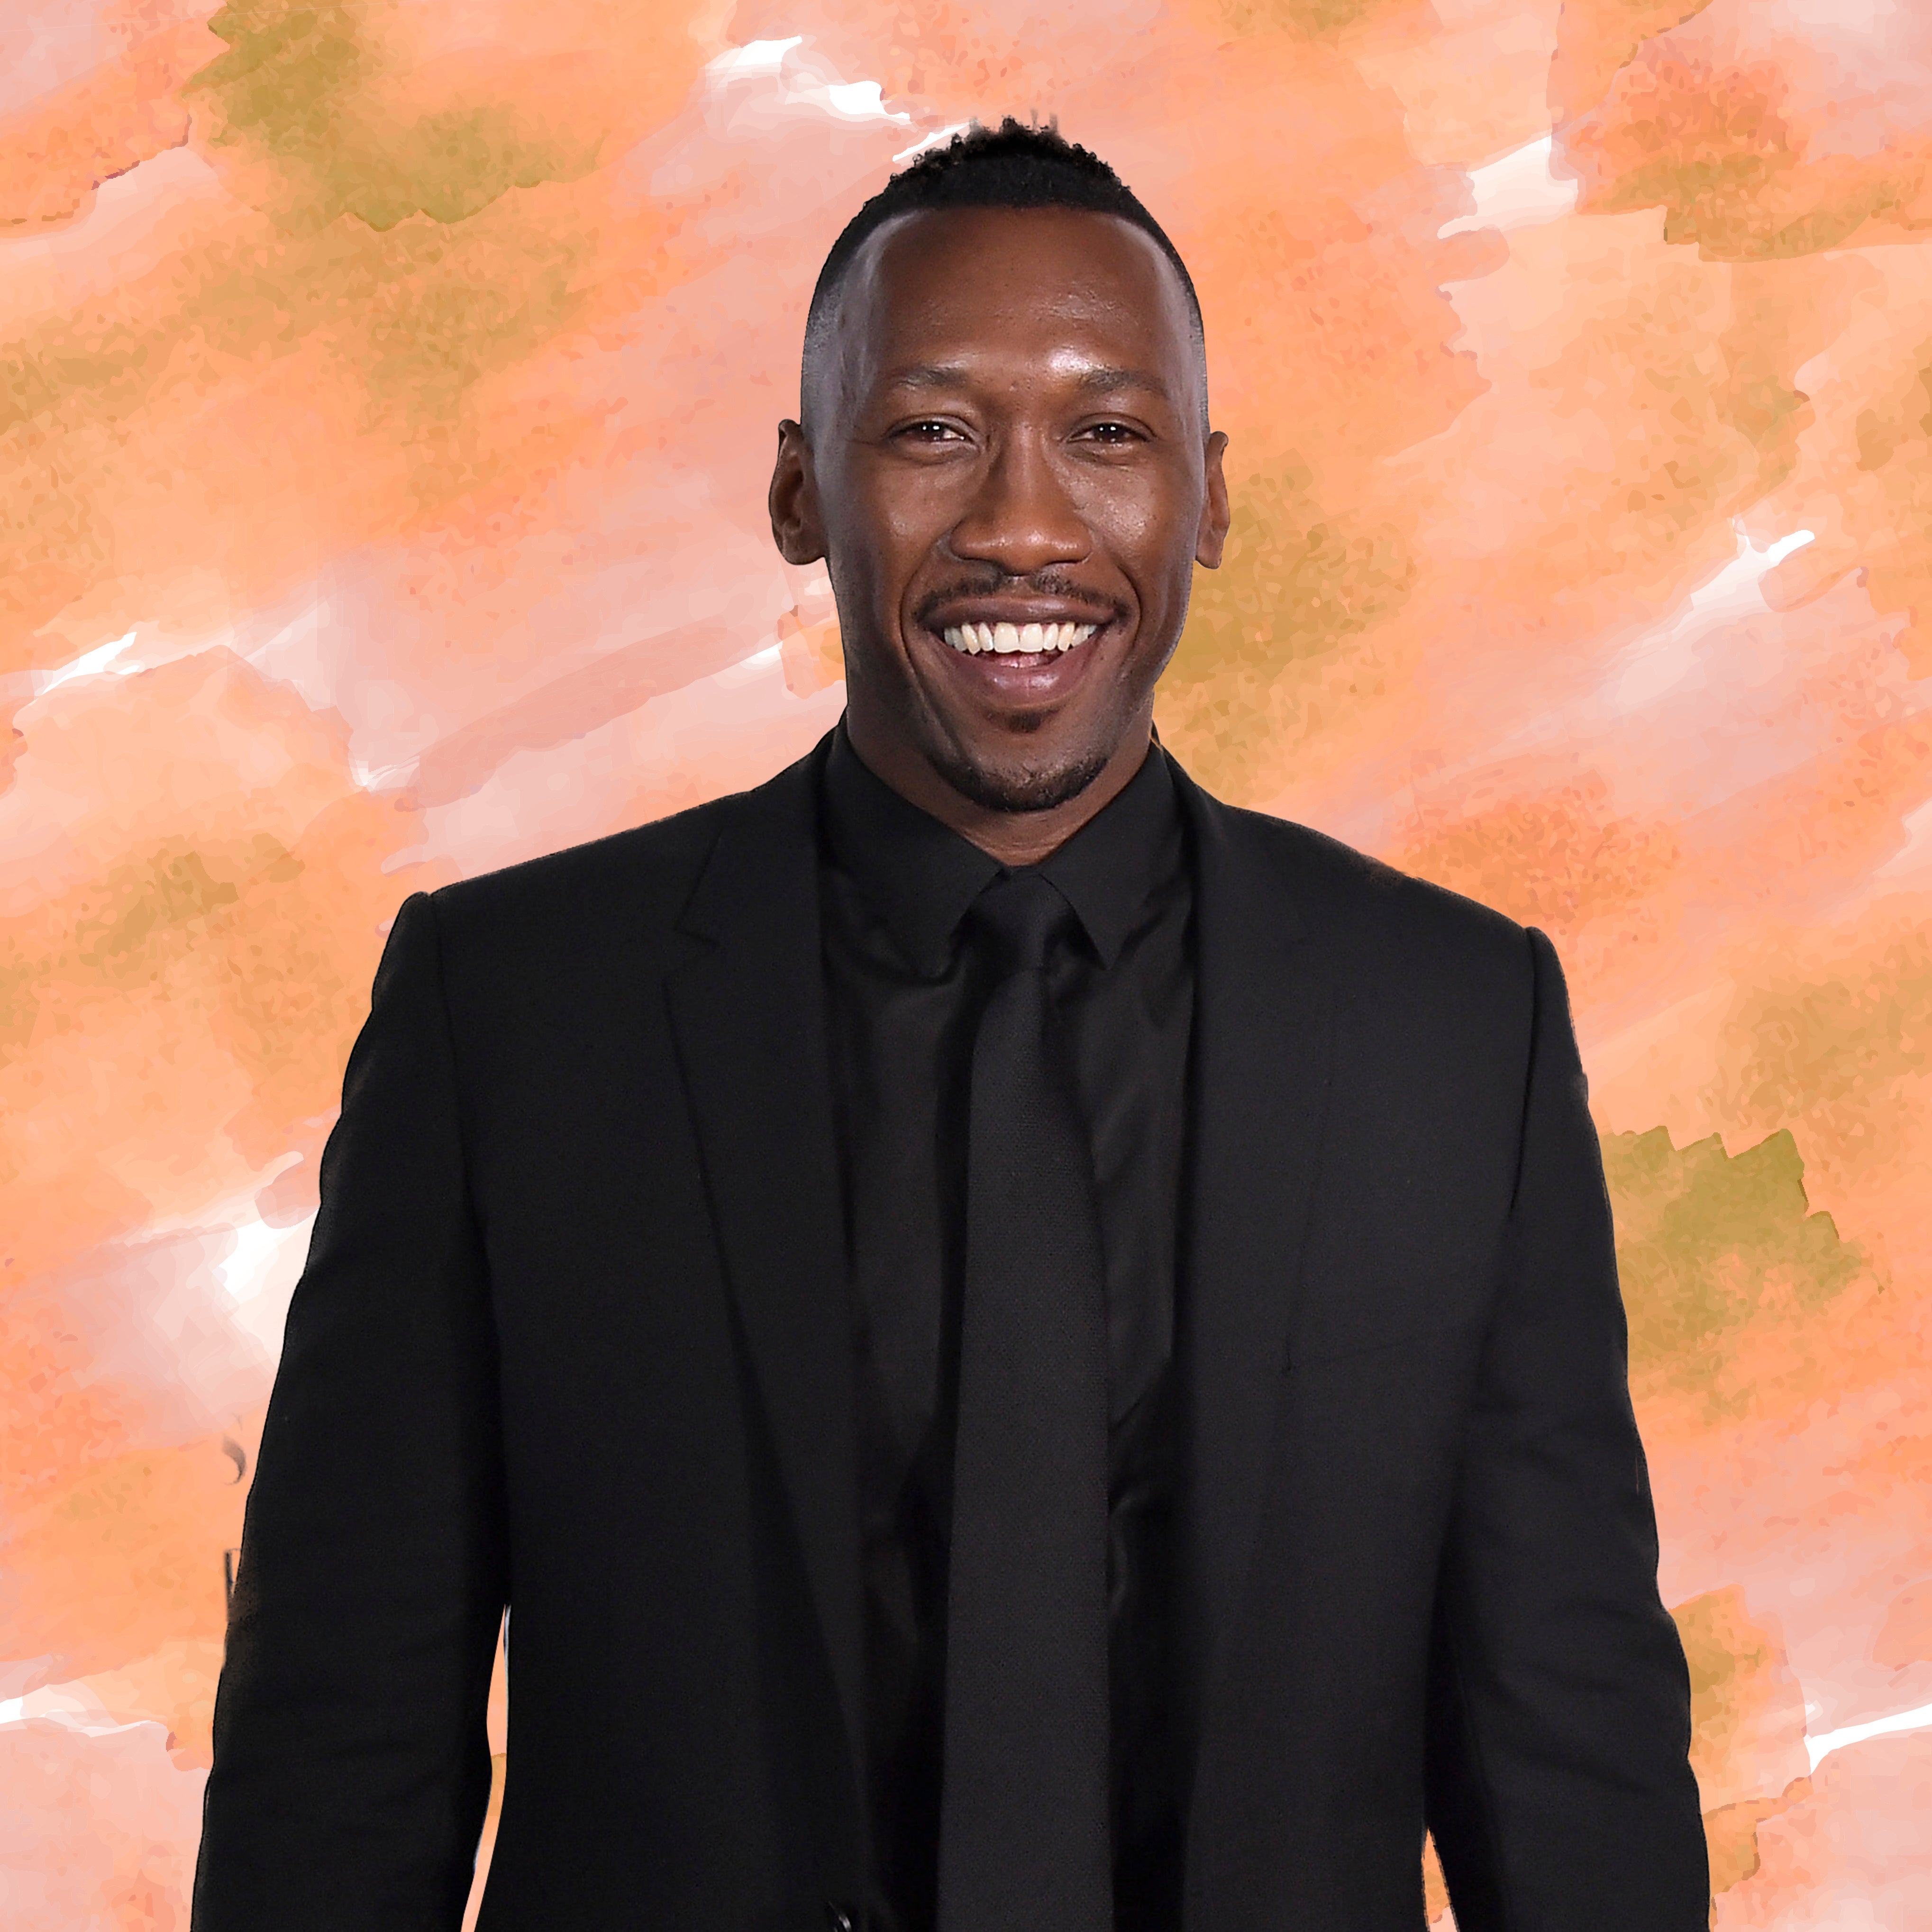 You Have To See This! Mahershala Ali's Alter Ego 'Prince Ali' Drops A Dope Freestyle